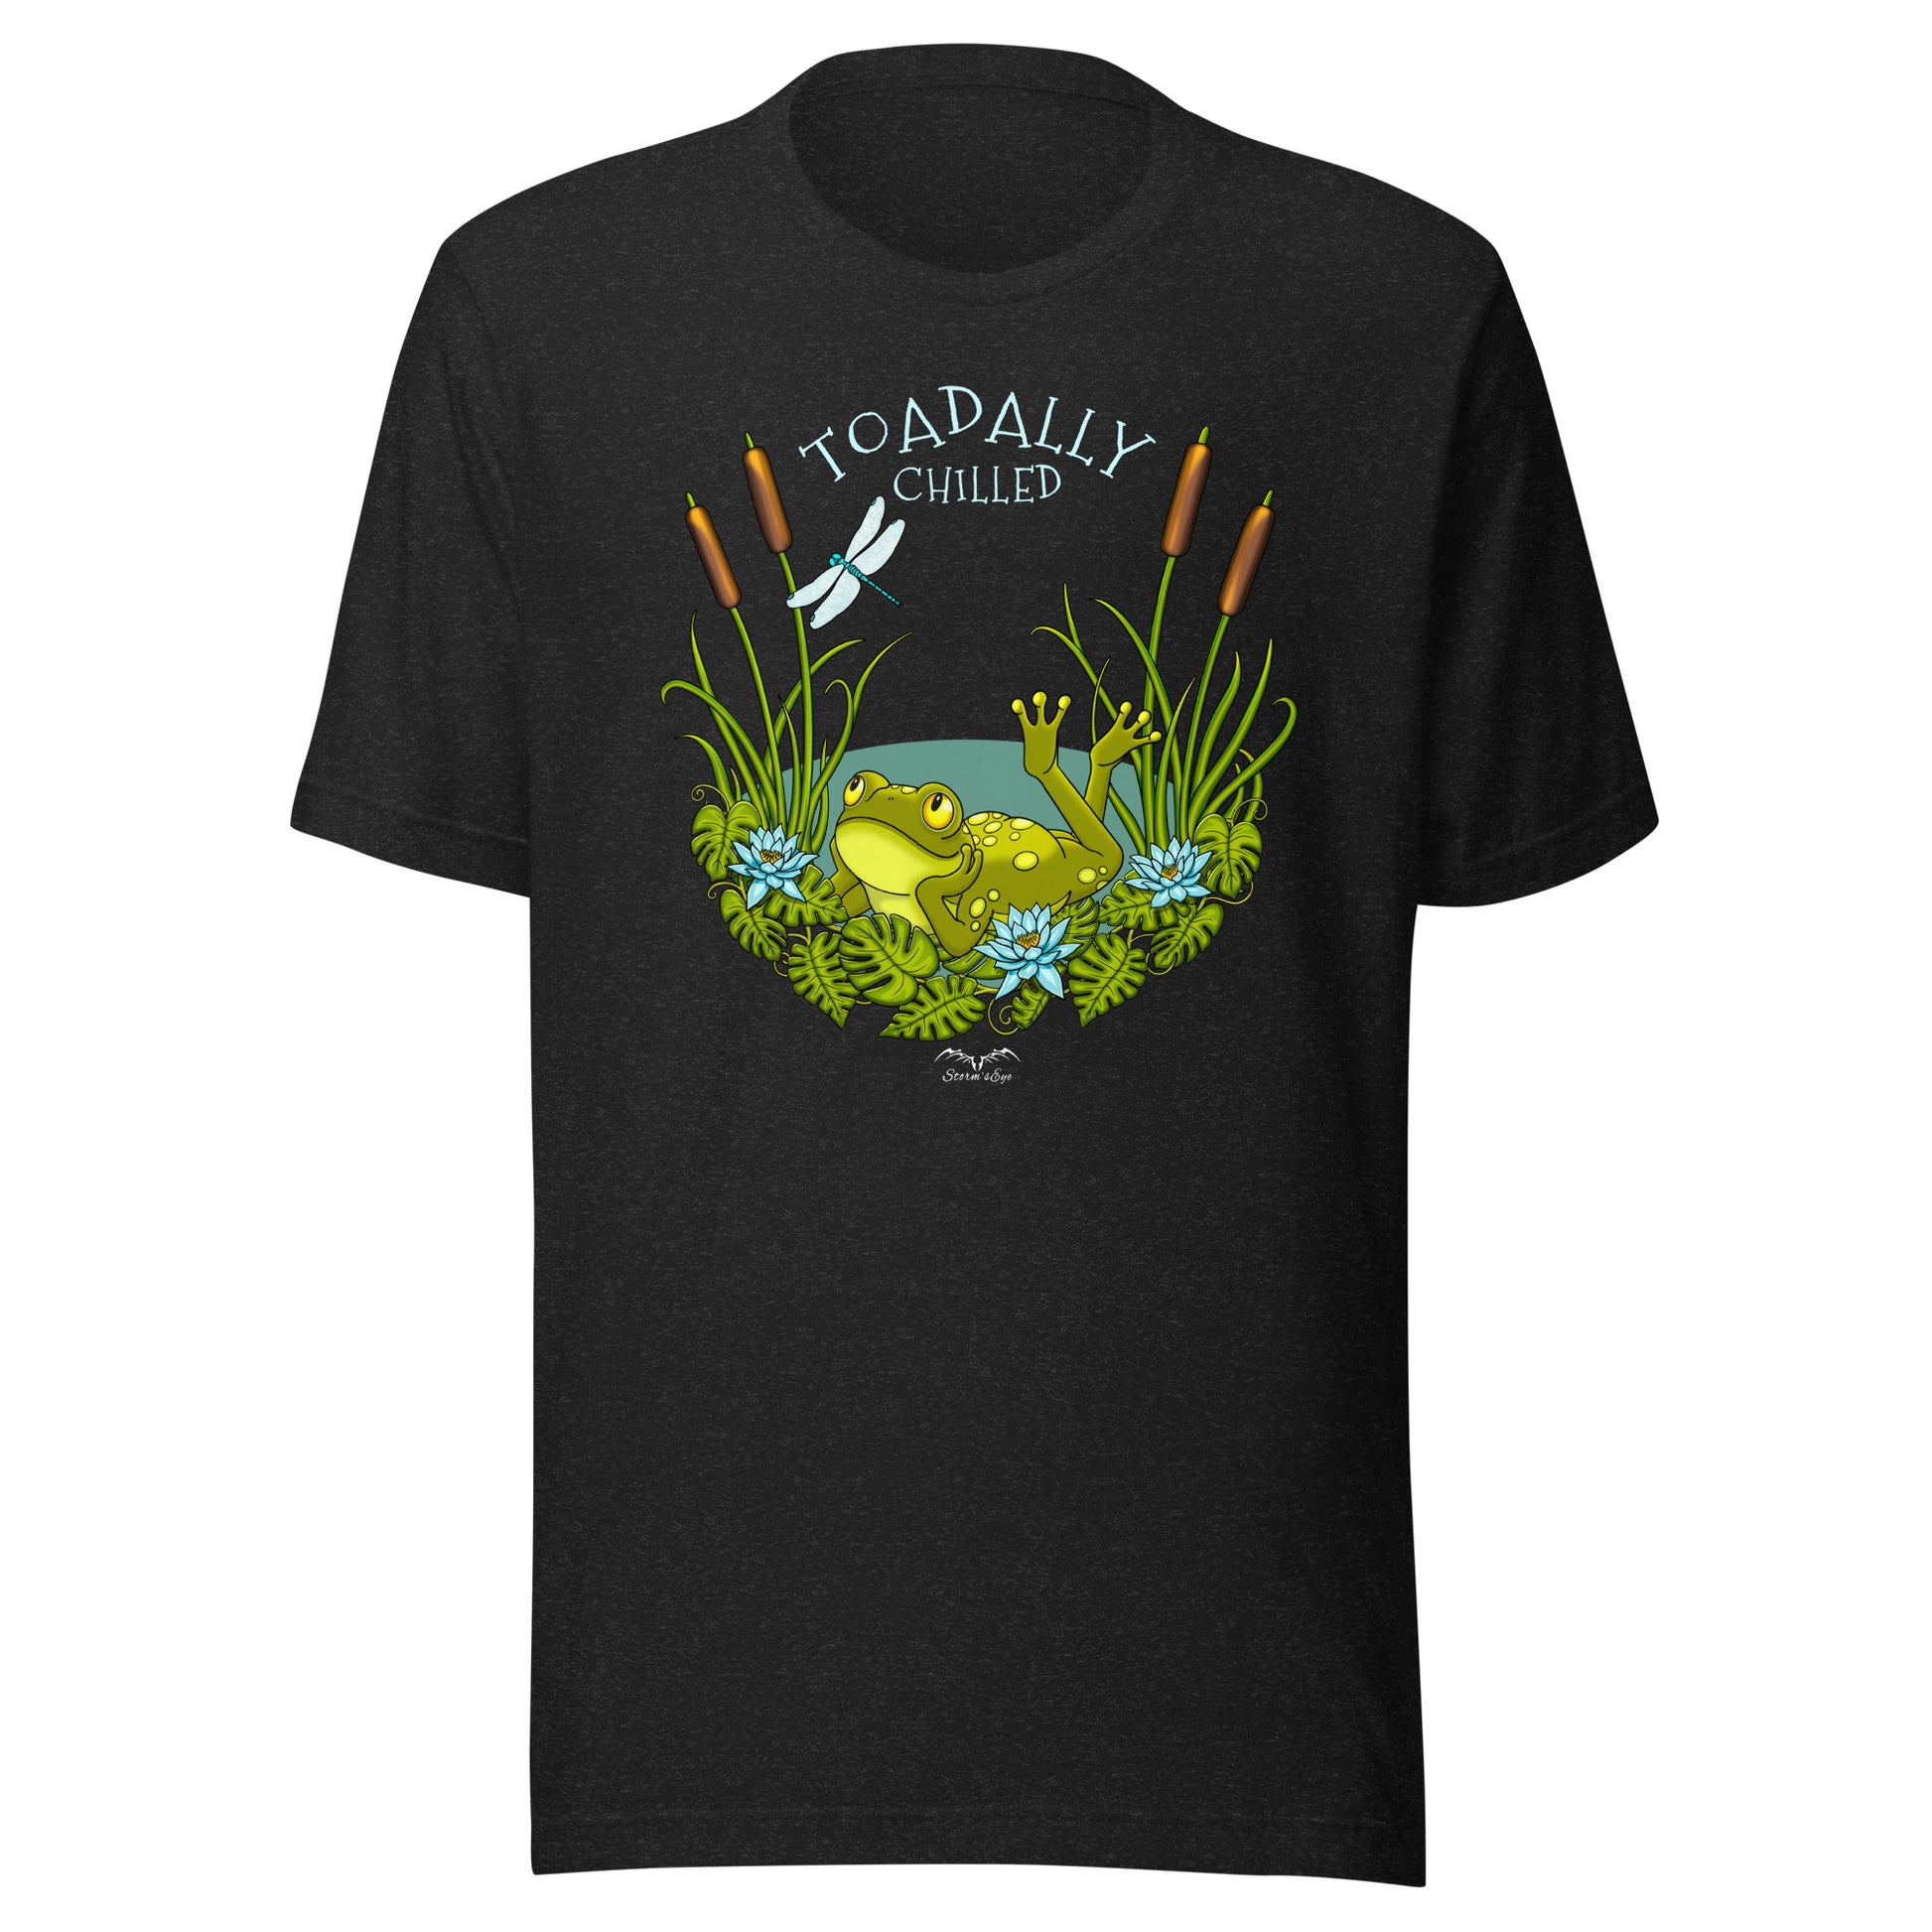 stormseye design toadally chilled T shirt, flat view heather black